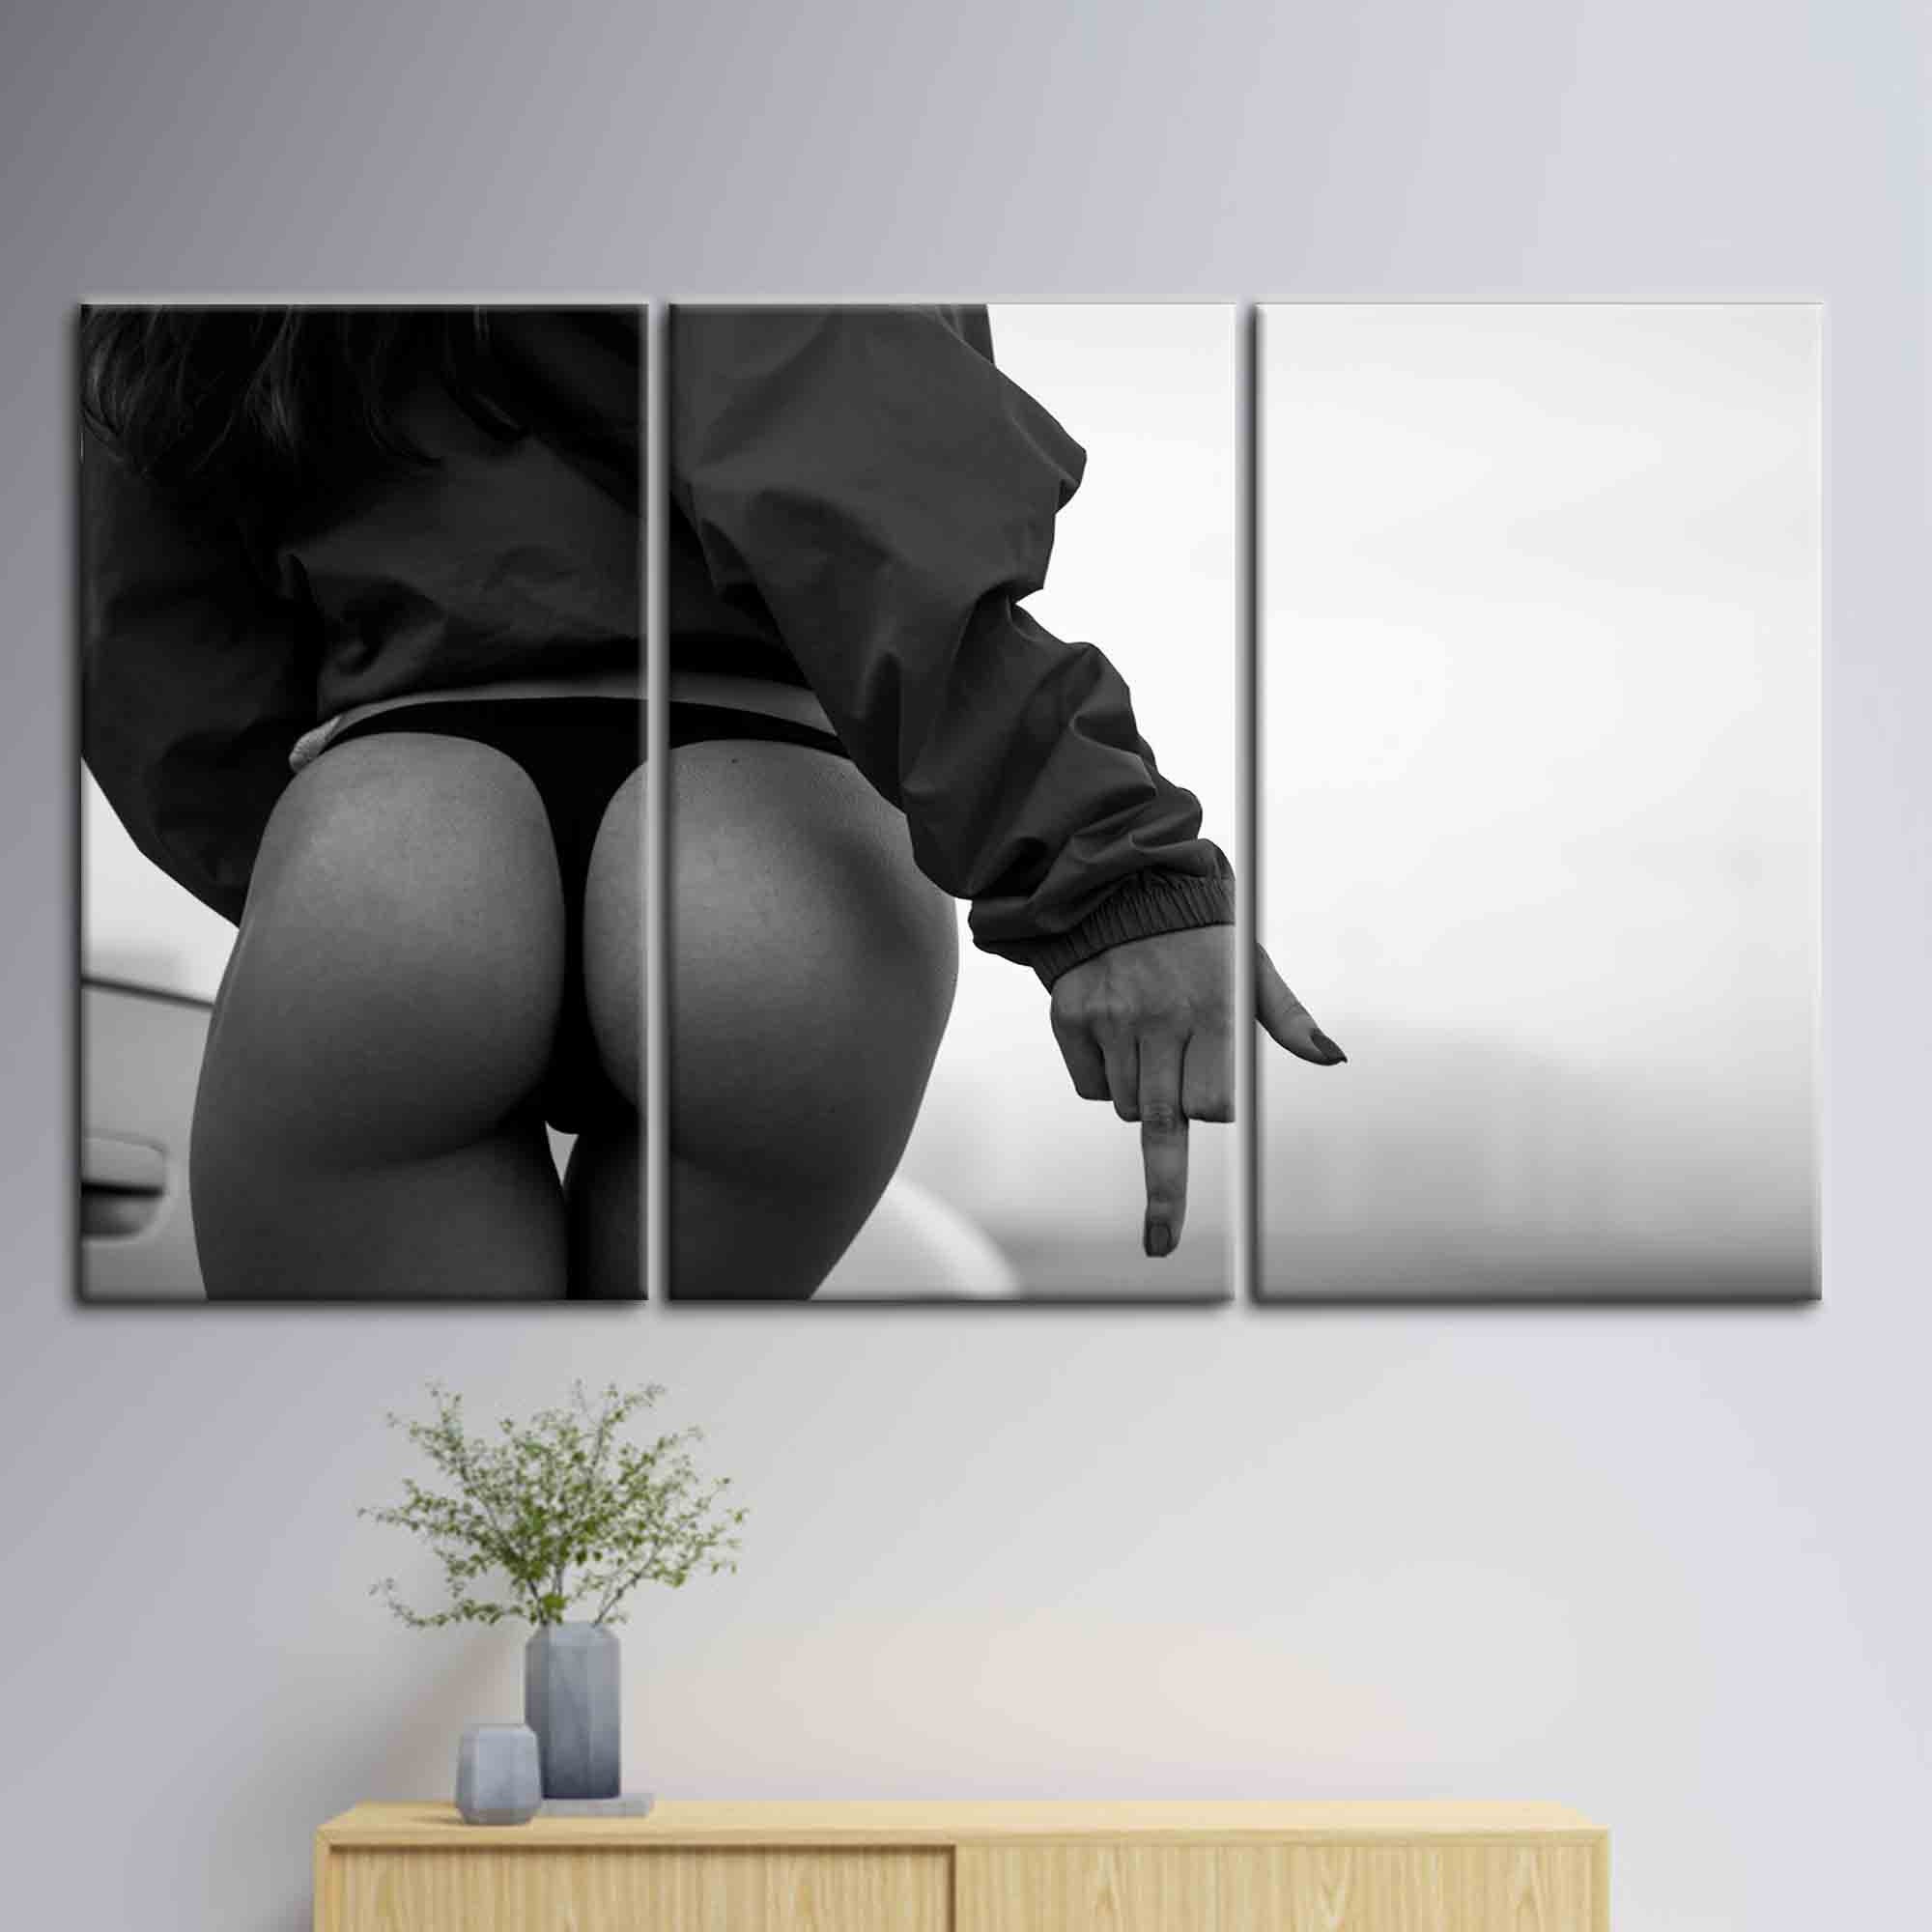 Girl in the Black Thong Woman Fuck You Wall Art Nude picture